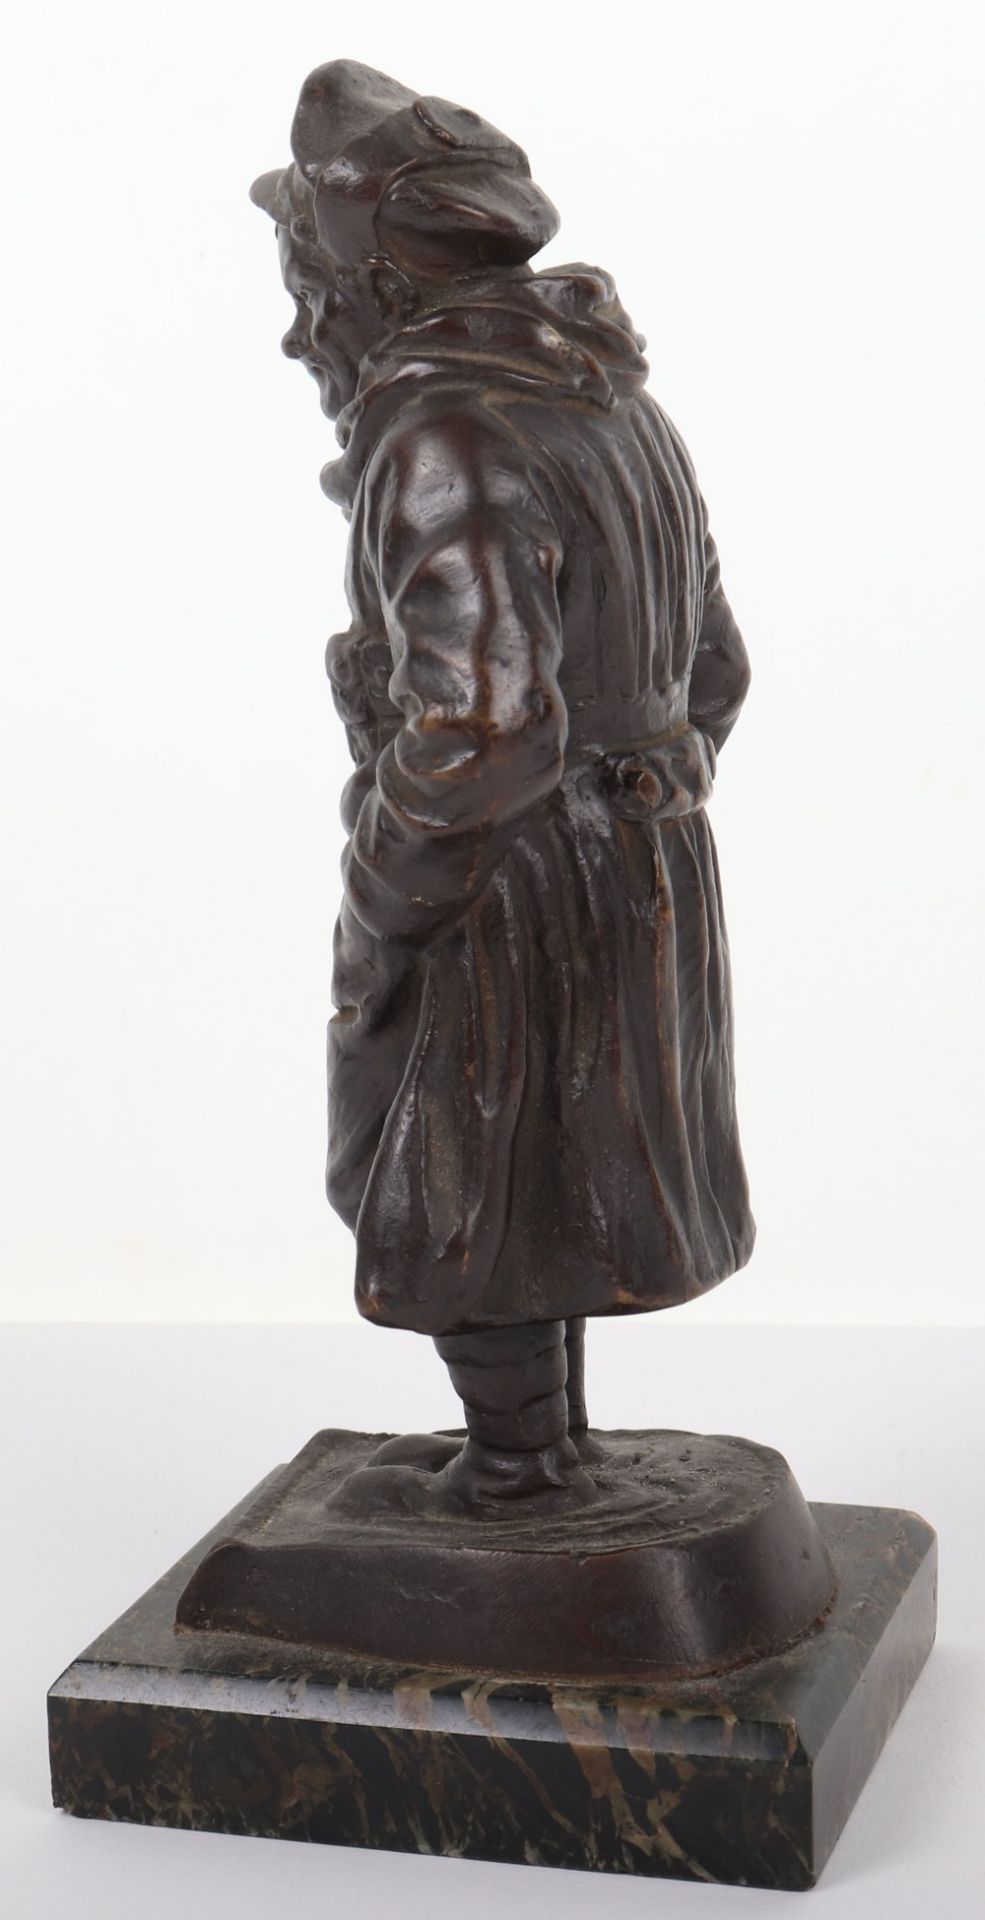 Bronze Figure of a WW1 British Tommy in the Bruce Bairnsfather “Old Bill” Style - Image 5 of 7